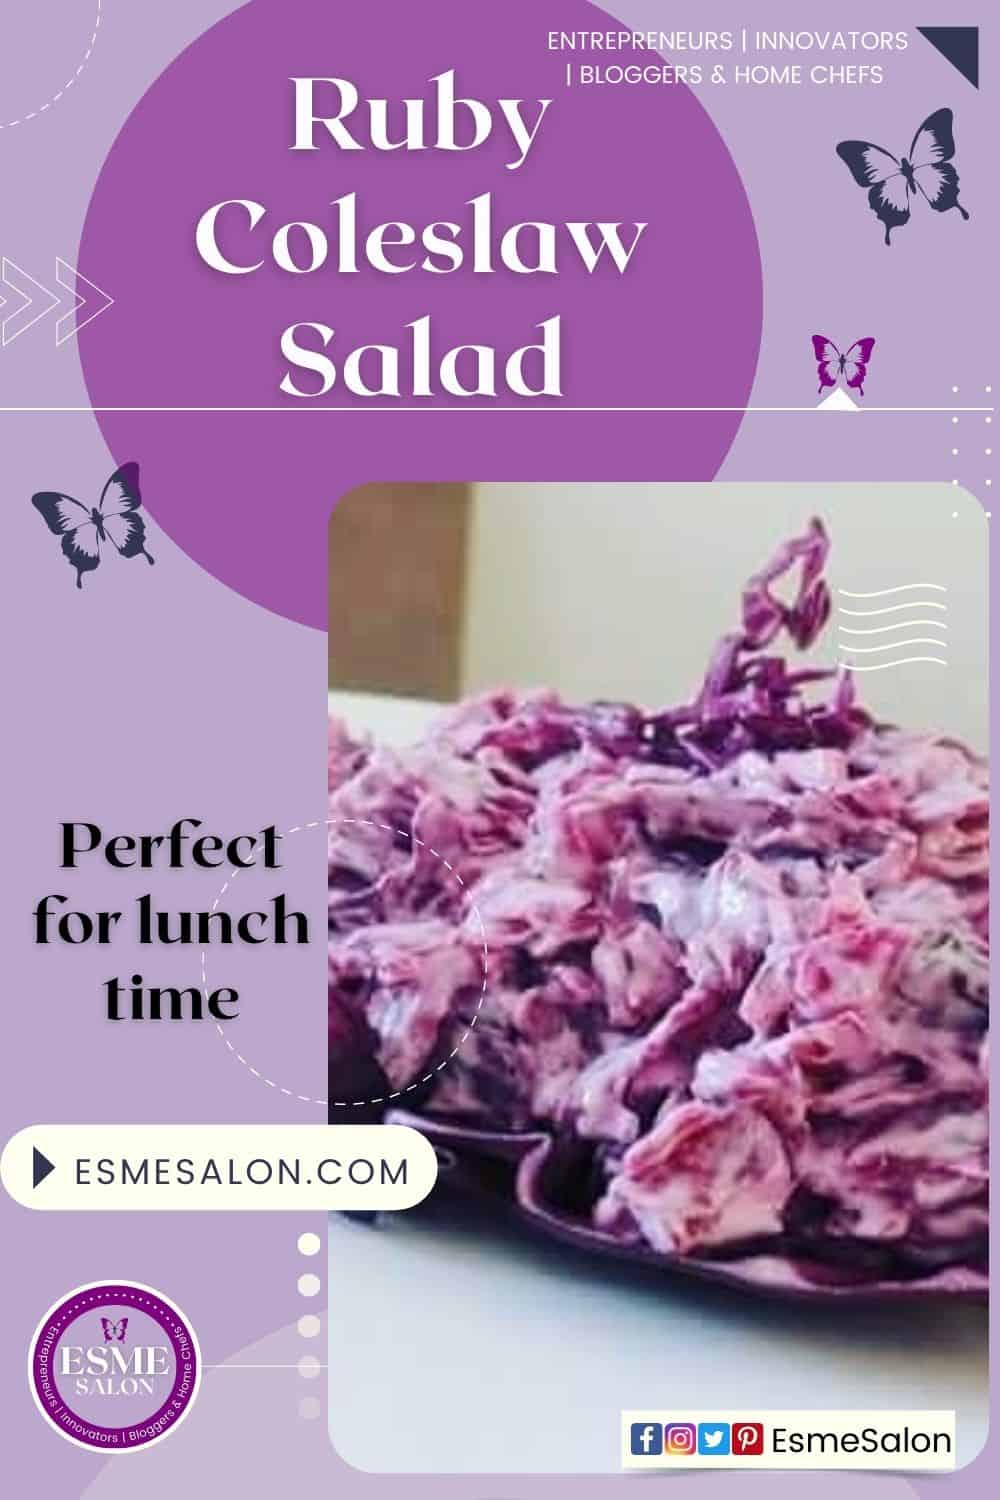 an image of a bowl of Ruby Coleslaw Salad